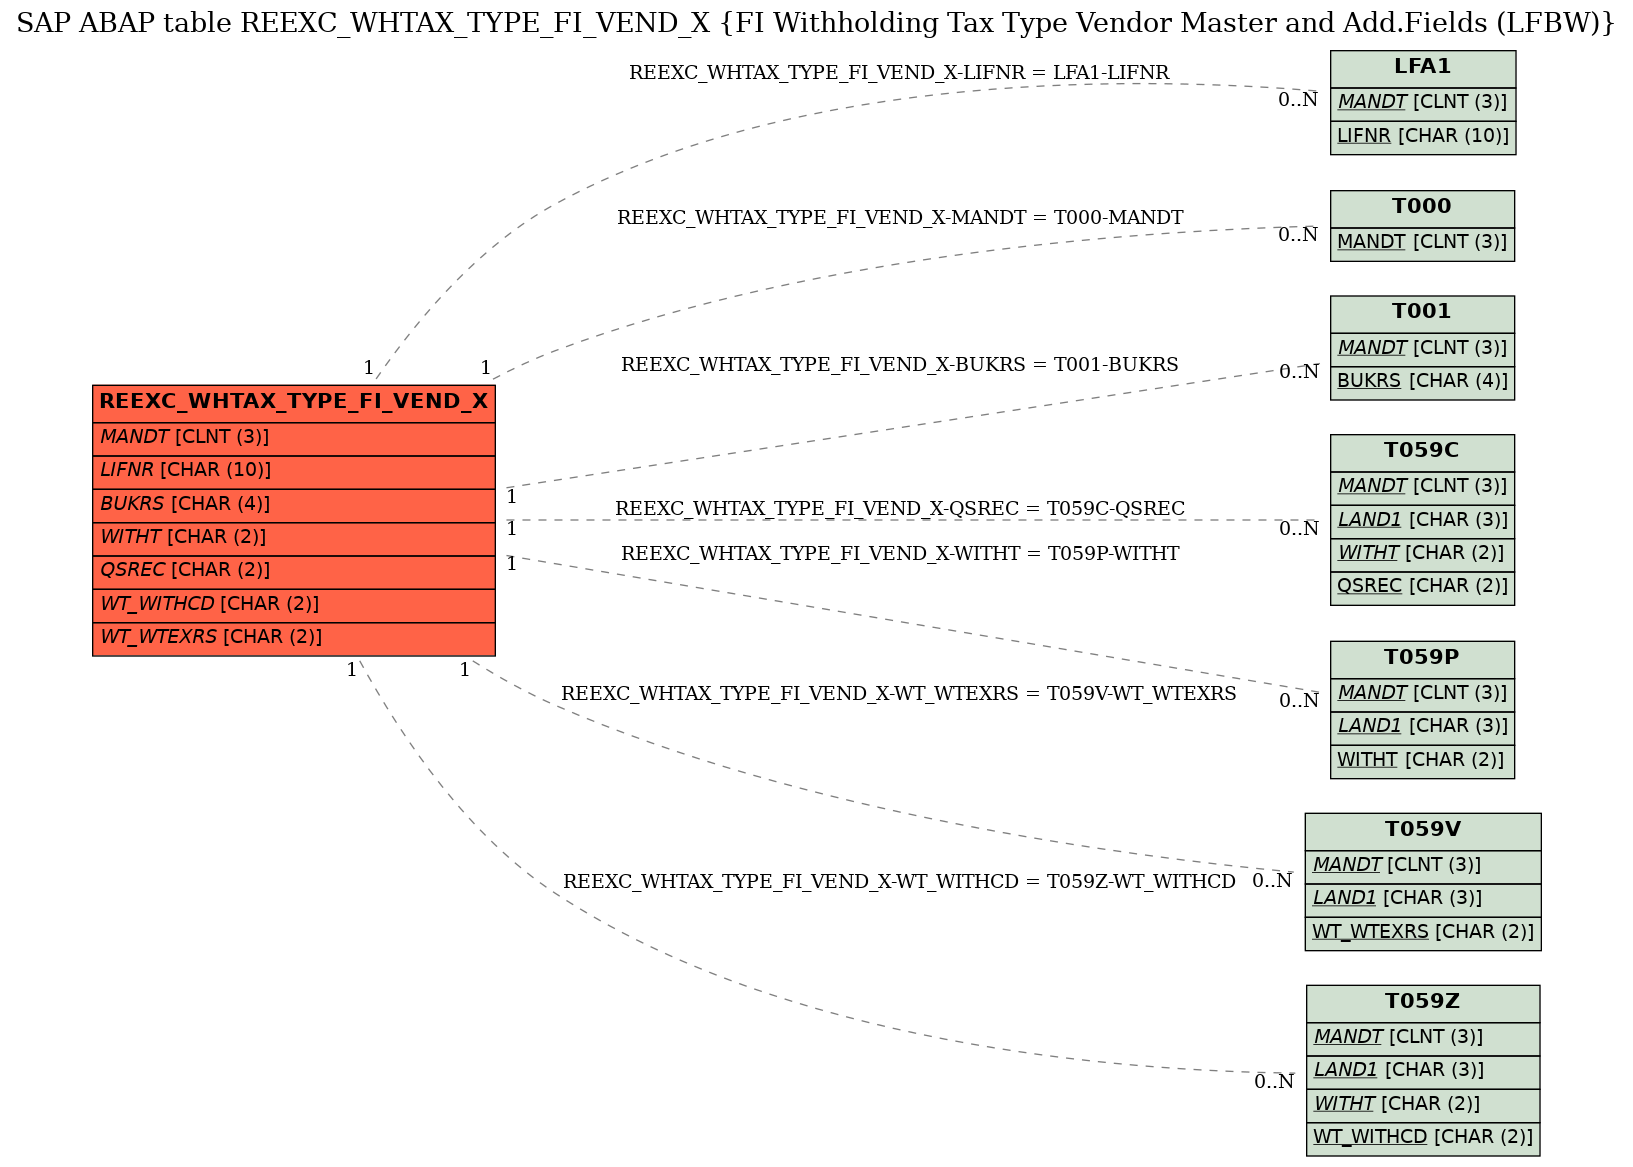 E-R Diagram for table REEXC_WHTAX_TYPE_FI_VEND_X (FI Withholding Tax Type Vendor Master and Add.Fields (LFBW))